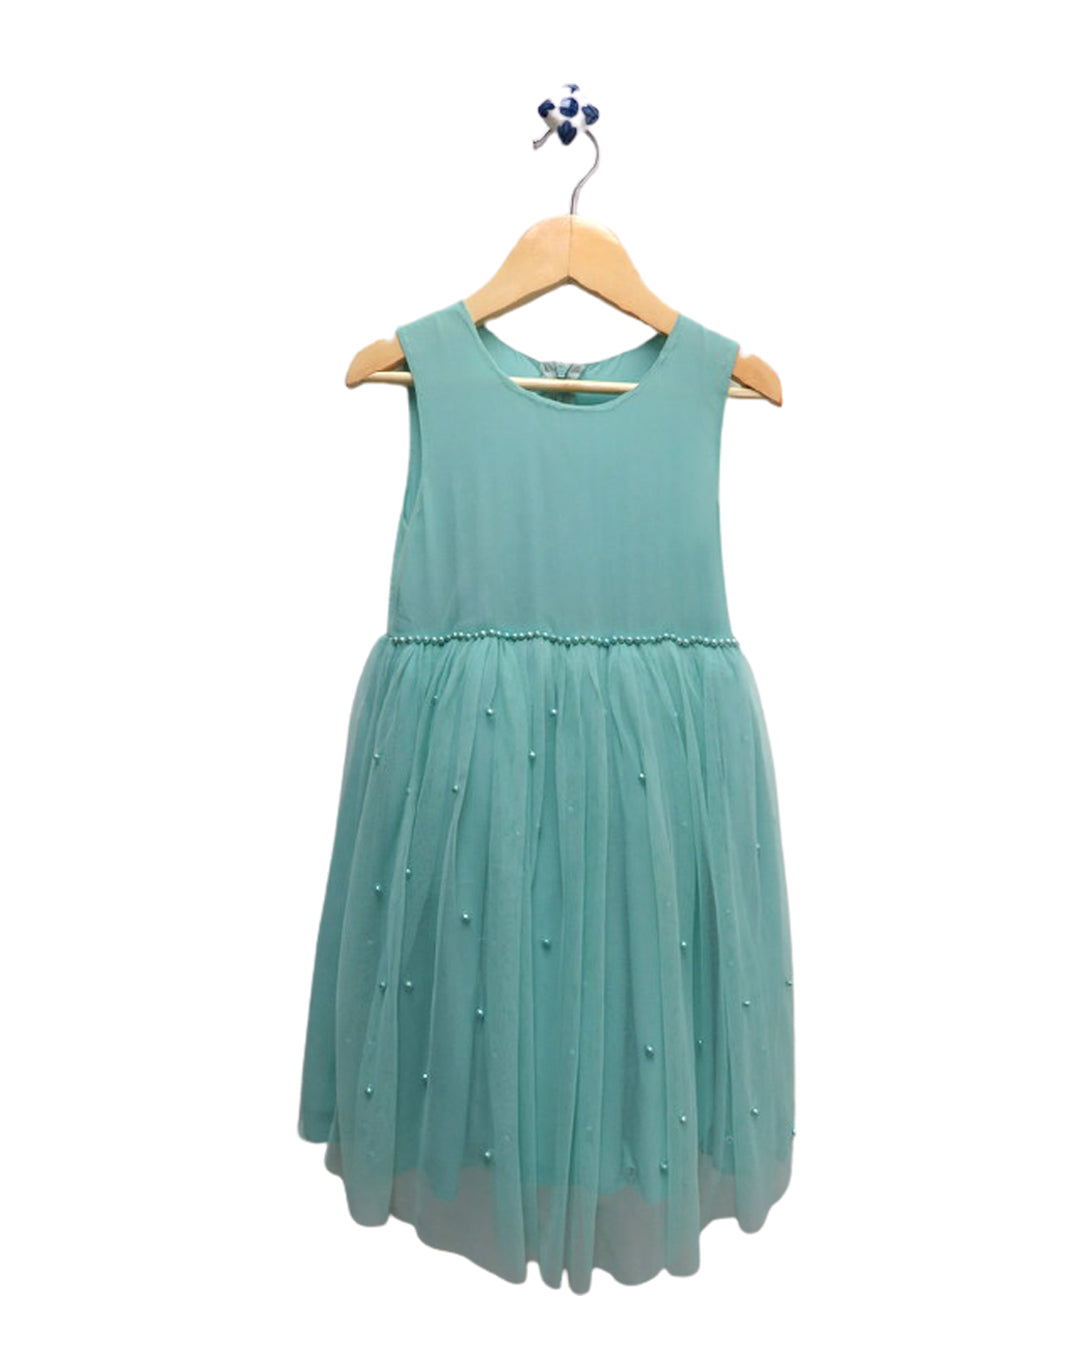 Aqua Party Dress With Embellishments On The Skirt And Waist